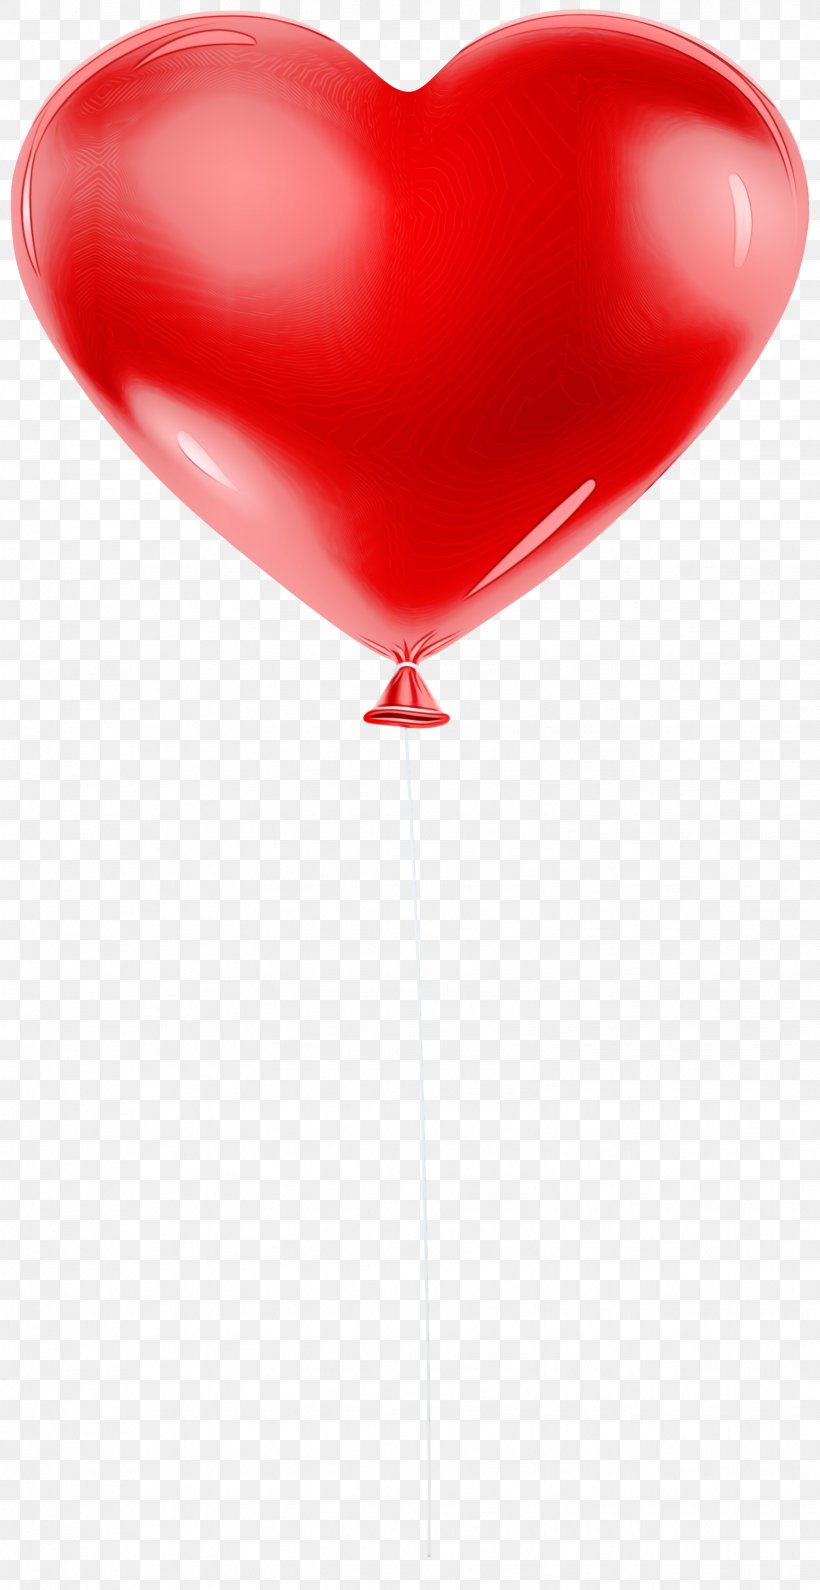 Watercolor Balloon, PNG, 1547x3000px, Watercolor, Balloon, Heart, Paint, Party Supply Download Free